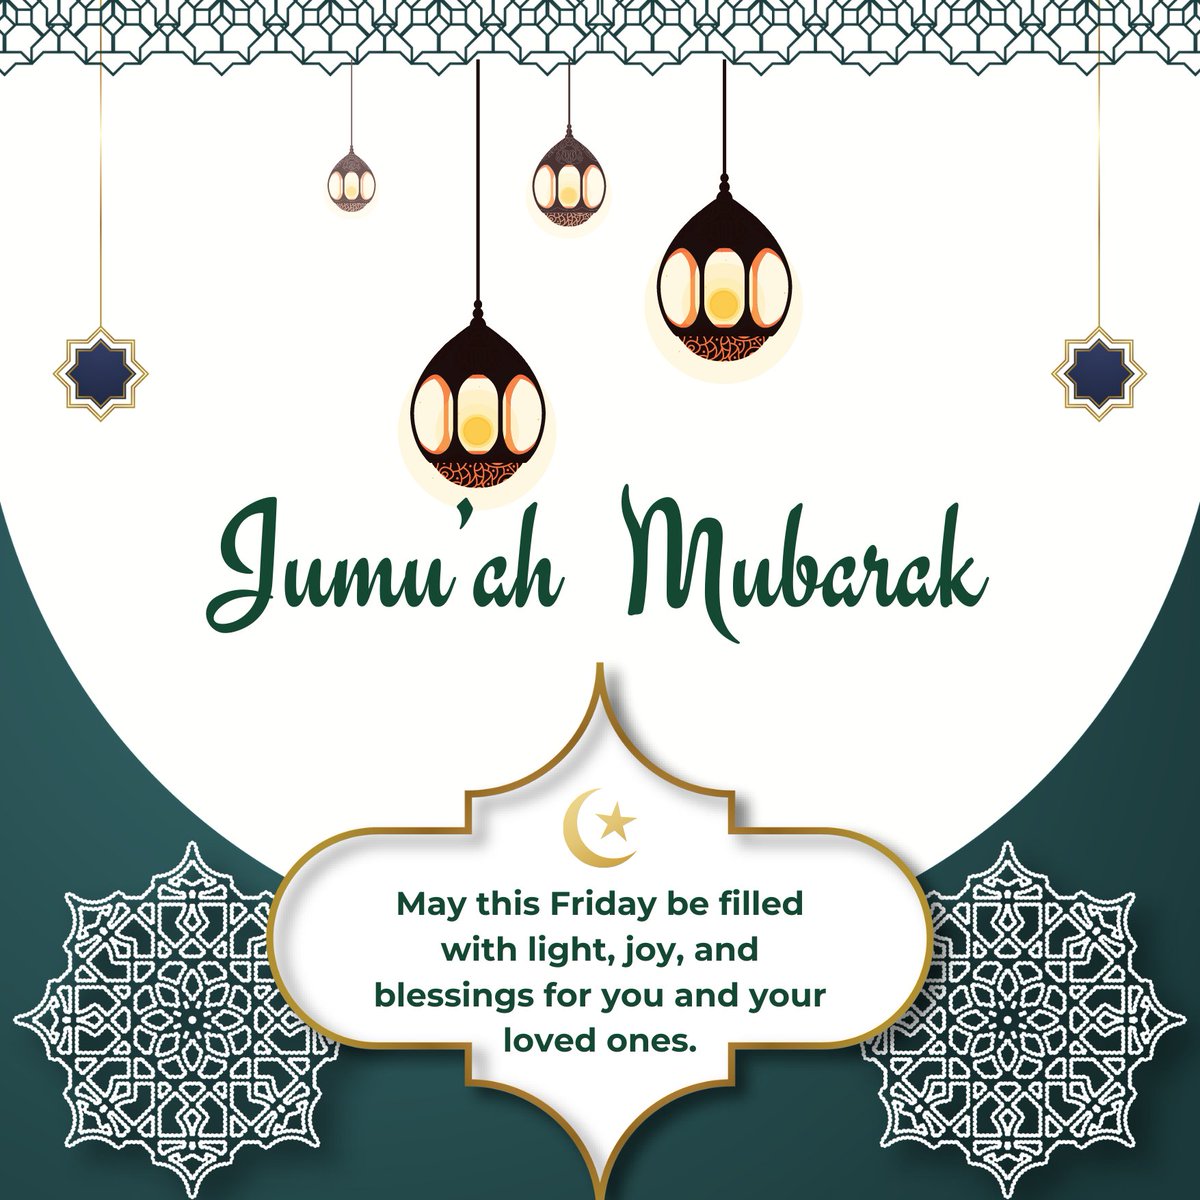 As the sun sets on another week, we at Next Level Marketing want to extend a heartfelt Jumu'ah Mubarak to all our Muslim followers. May this blessed Friday bring you moments of peace, joy, and connection with loved ones.